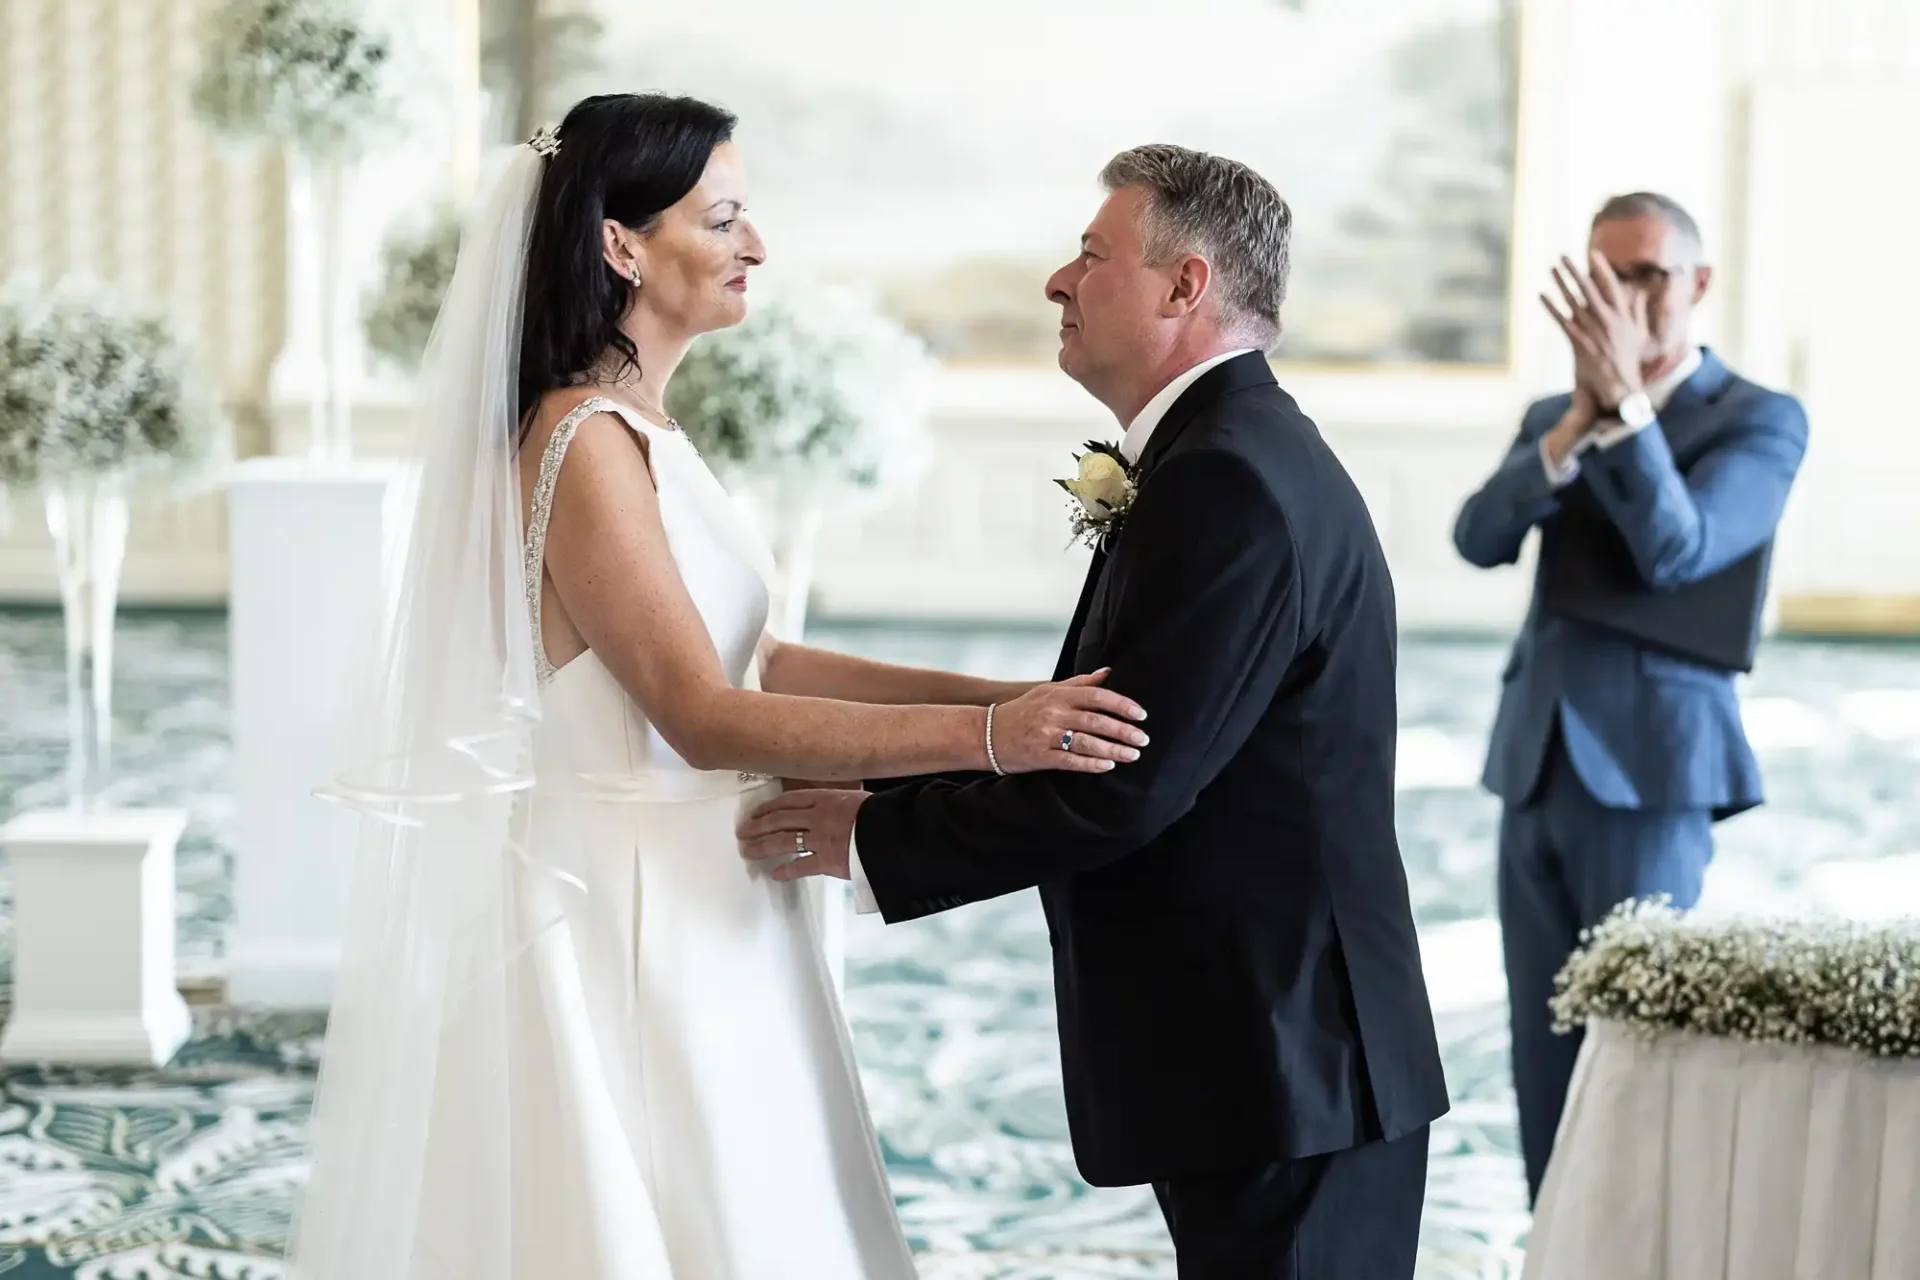 Bride and groom holding hands and smiling at each other during their wedding ceremony, with an emotional man applauding in the background.